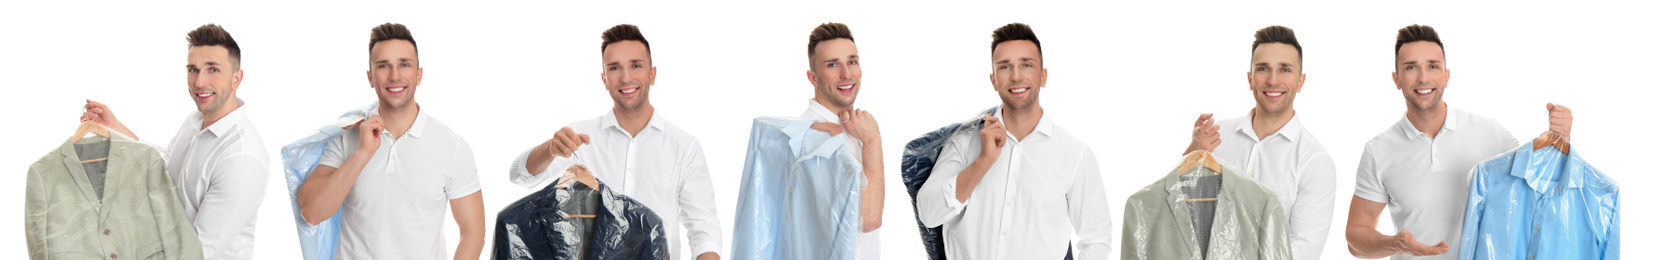 Collage of man holding hanger with clothes on white background. Dry-cleaning service